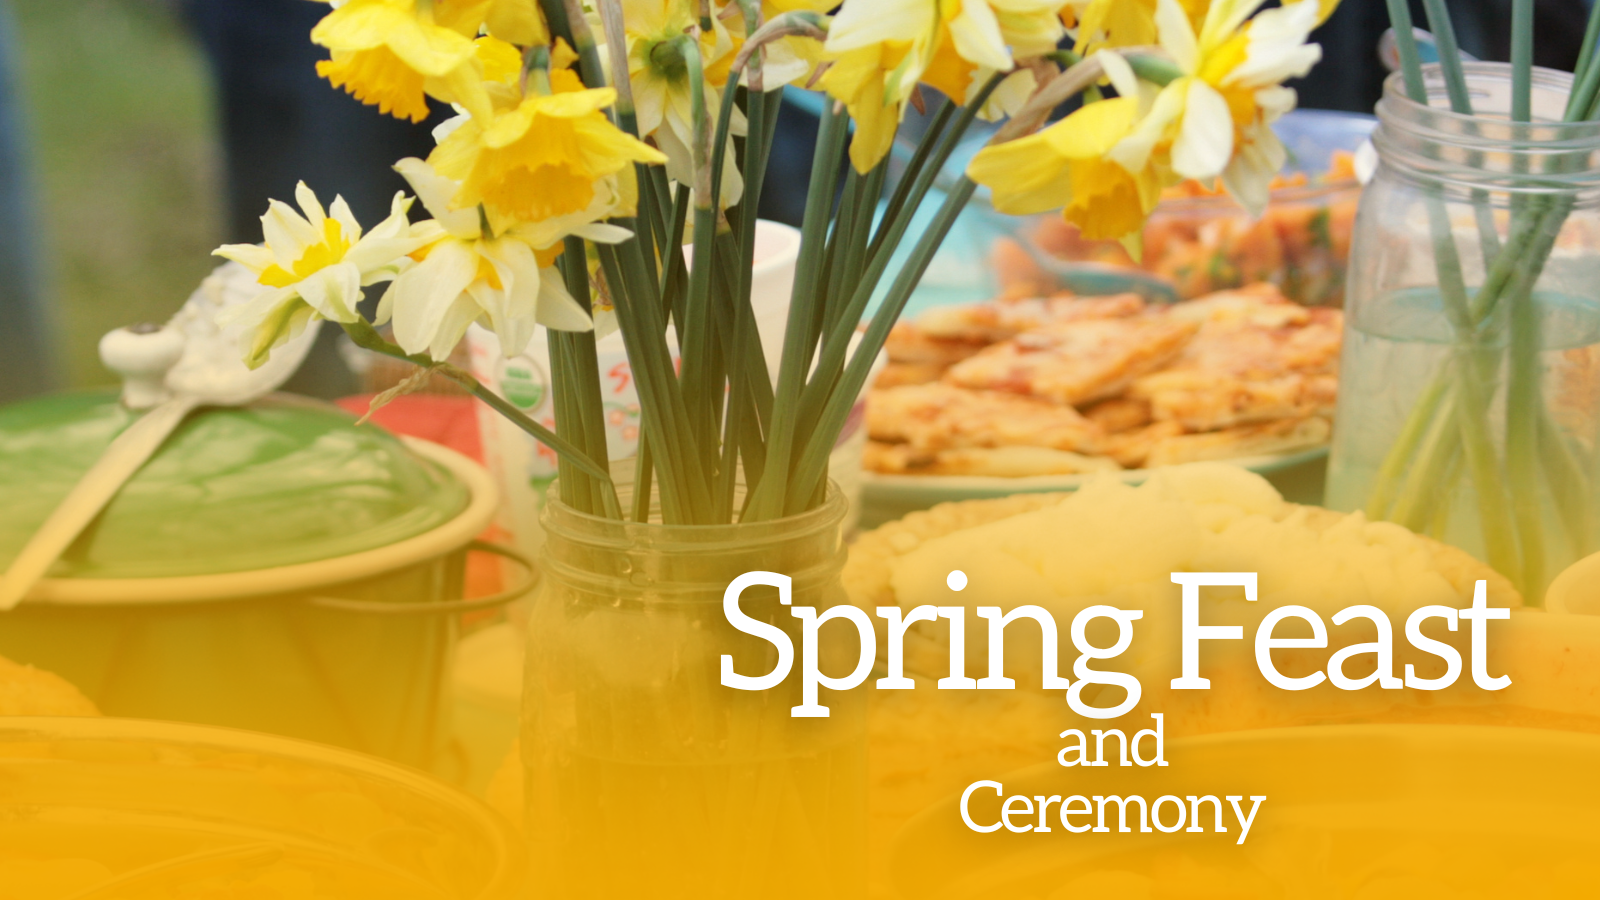 Spring Feast and Ceremony